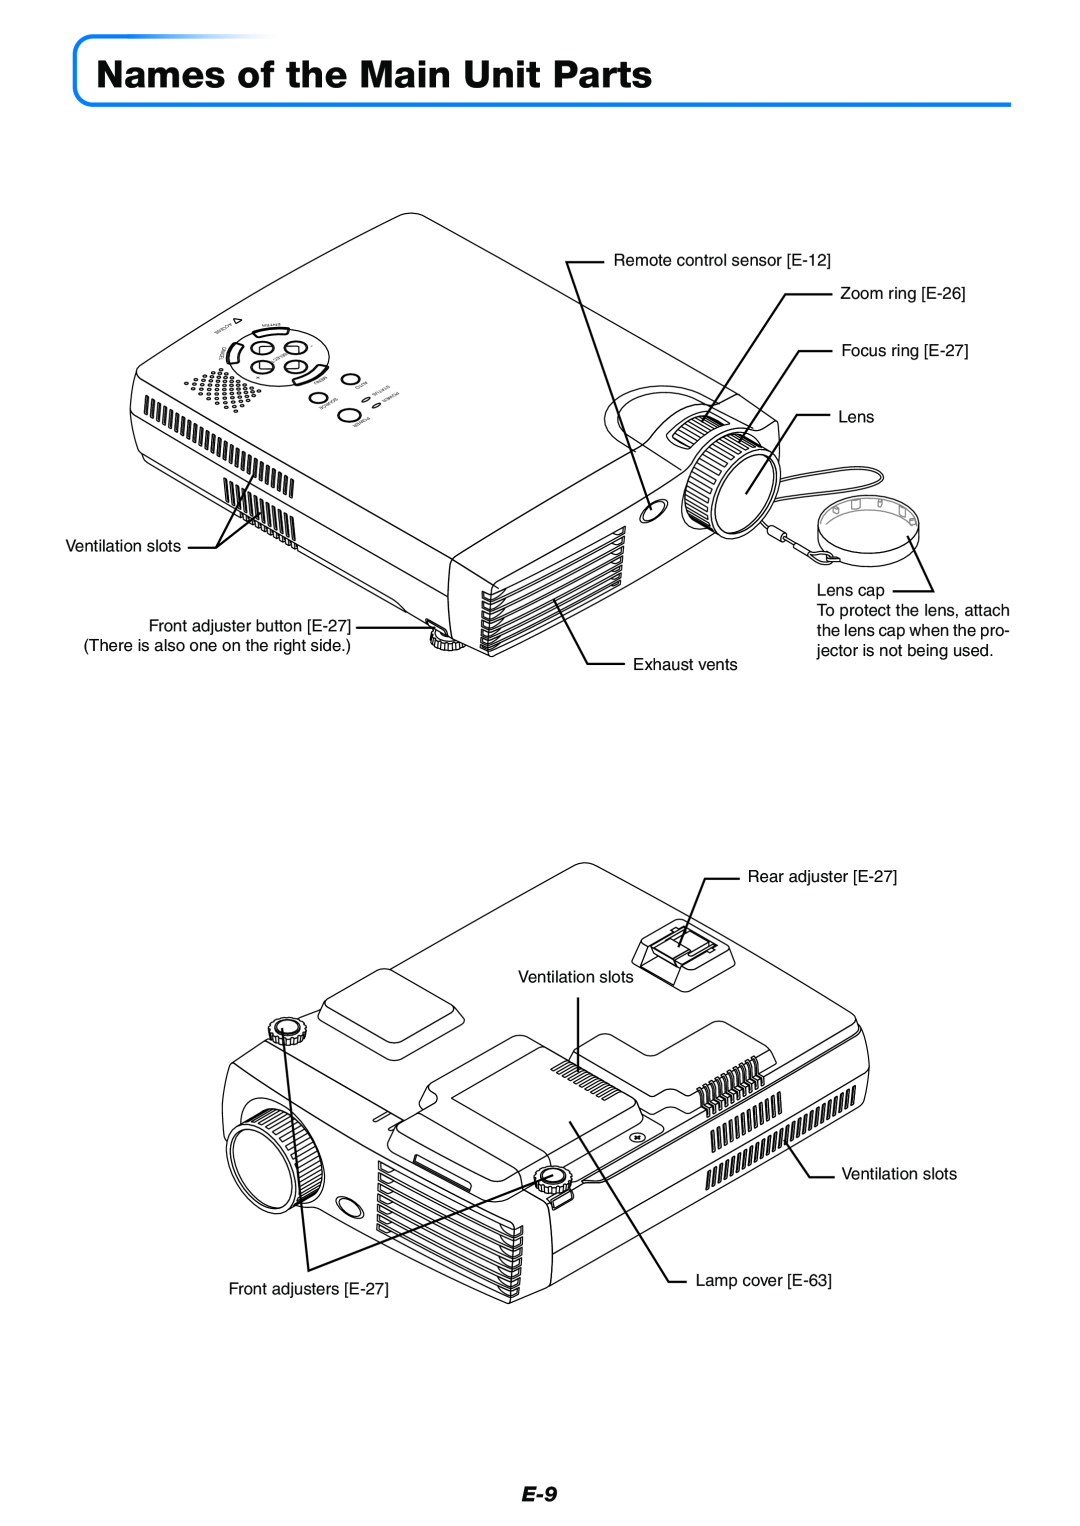 PLUS Vision Data Projector user manual Names of the Main Unit Parts 